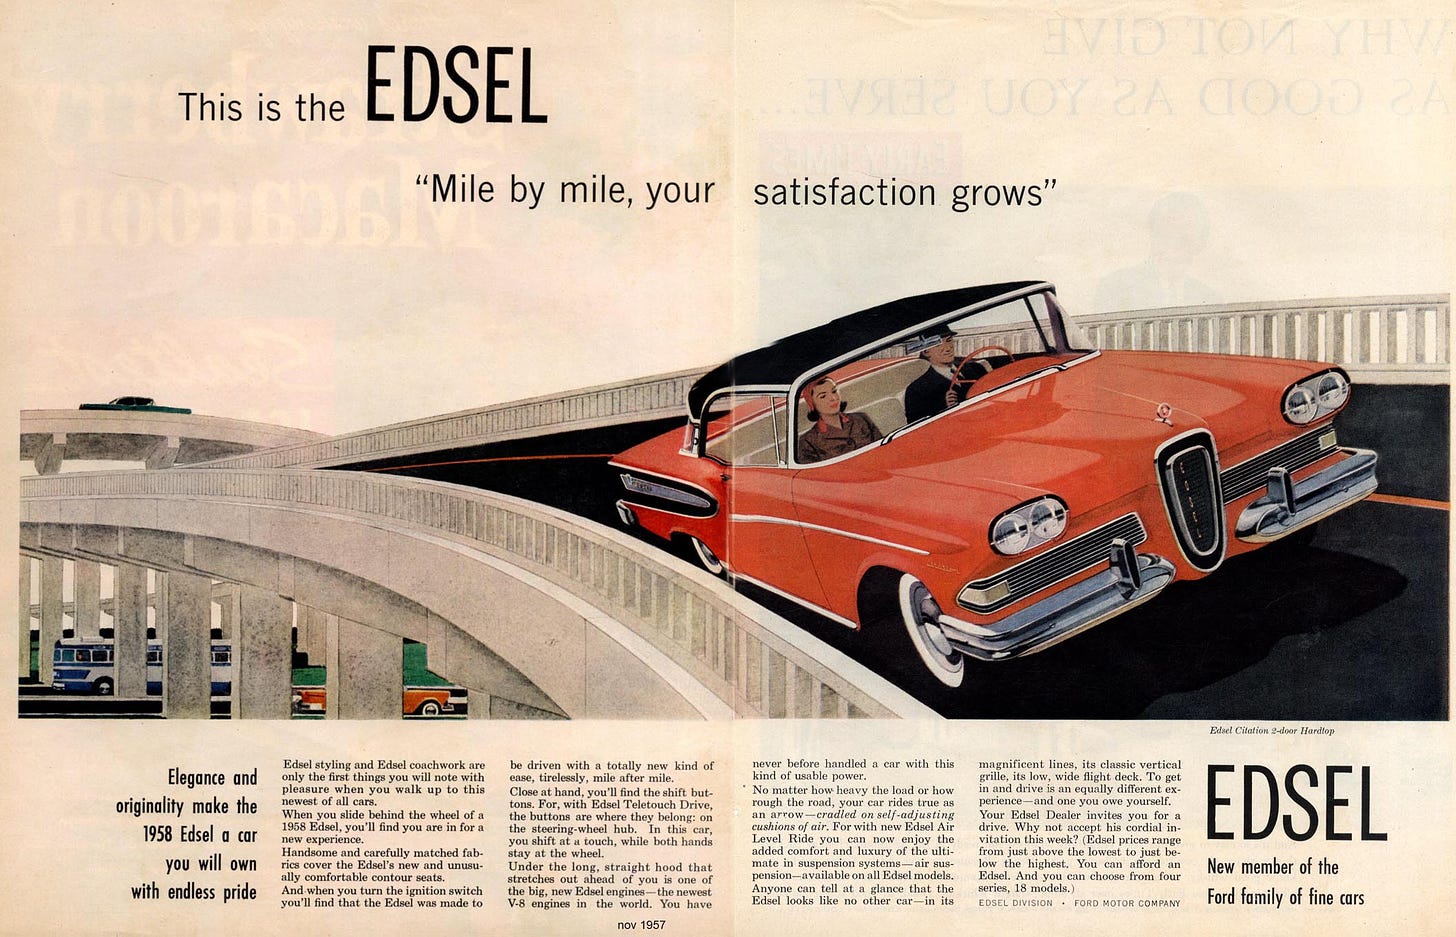 The World of the Car, Marque Edsel